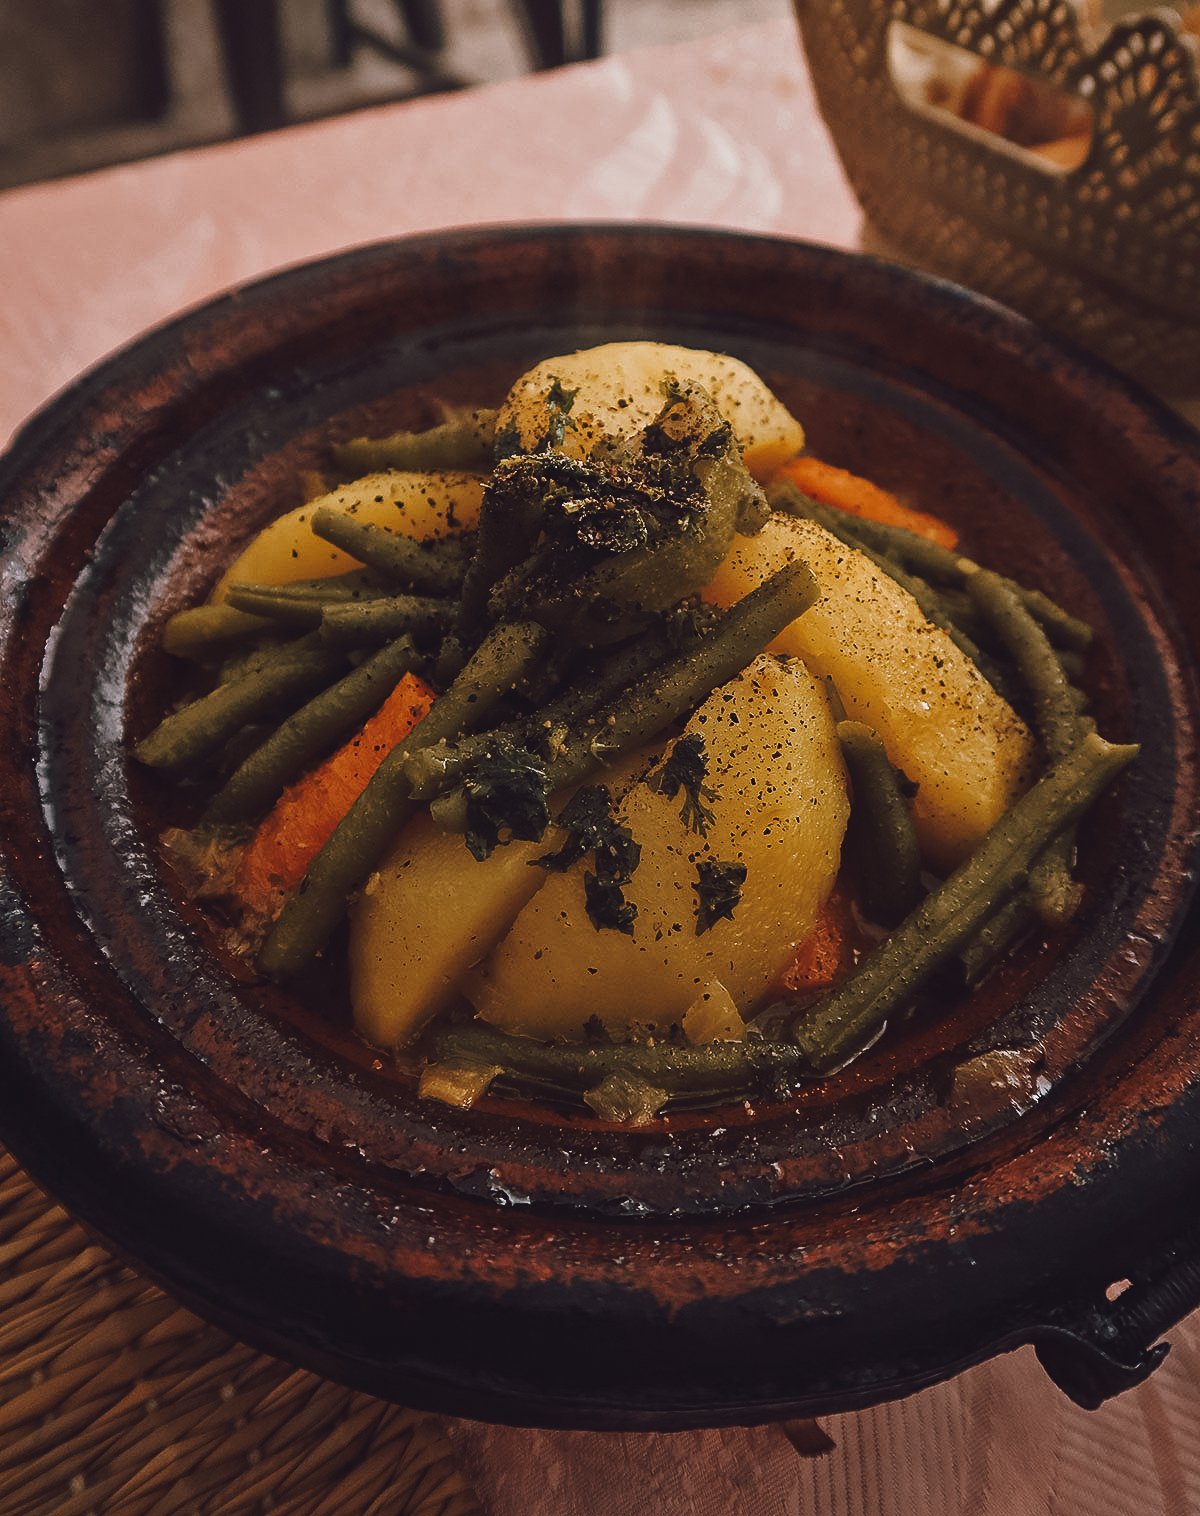 Vegetable tagine at a restaurant in Essaouira